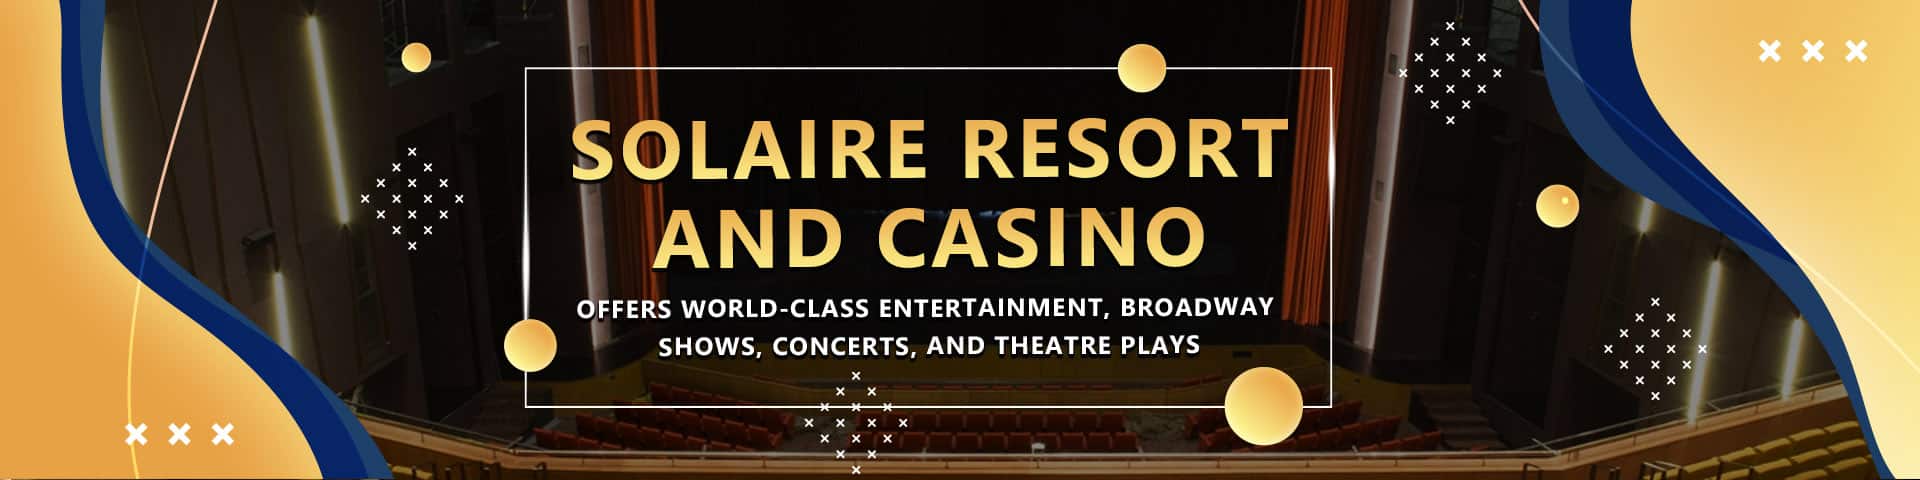 Solaire Resort And Casino offer world class